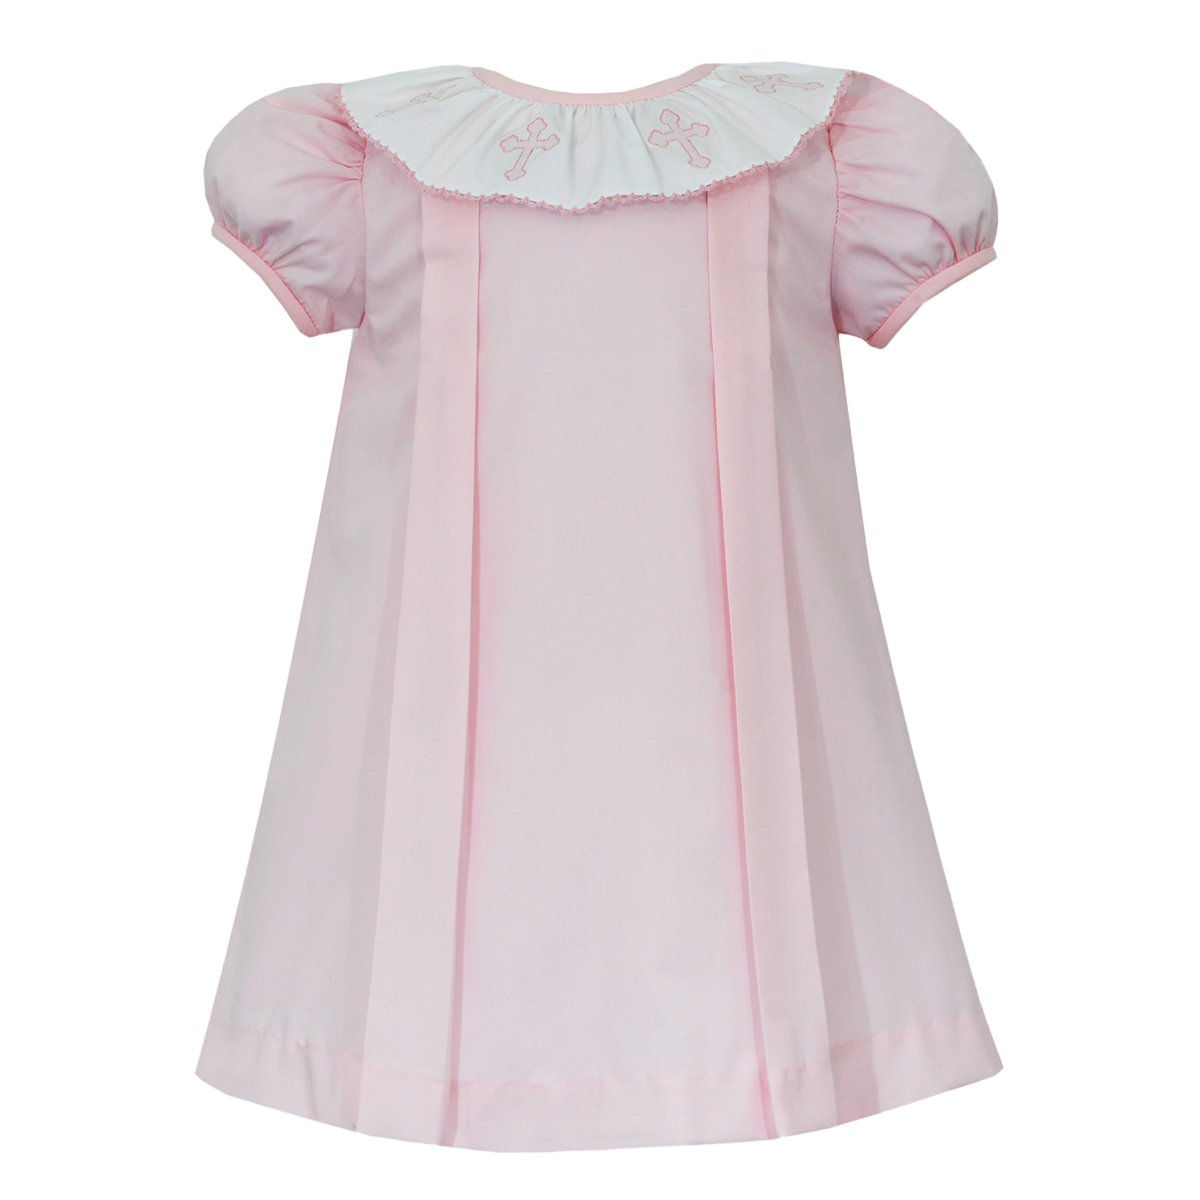 Embroidered Crosses Girl's Pink Easter Dress by Anavini